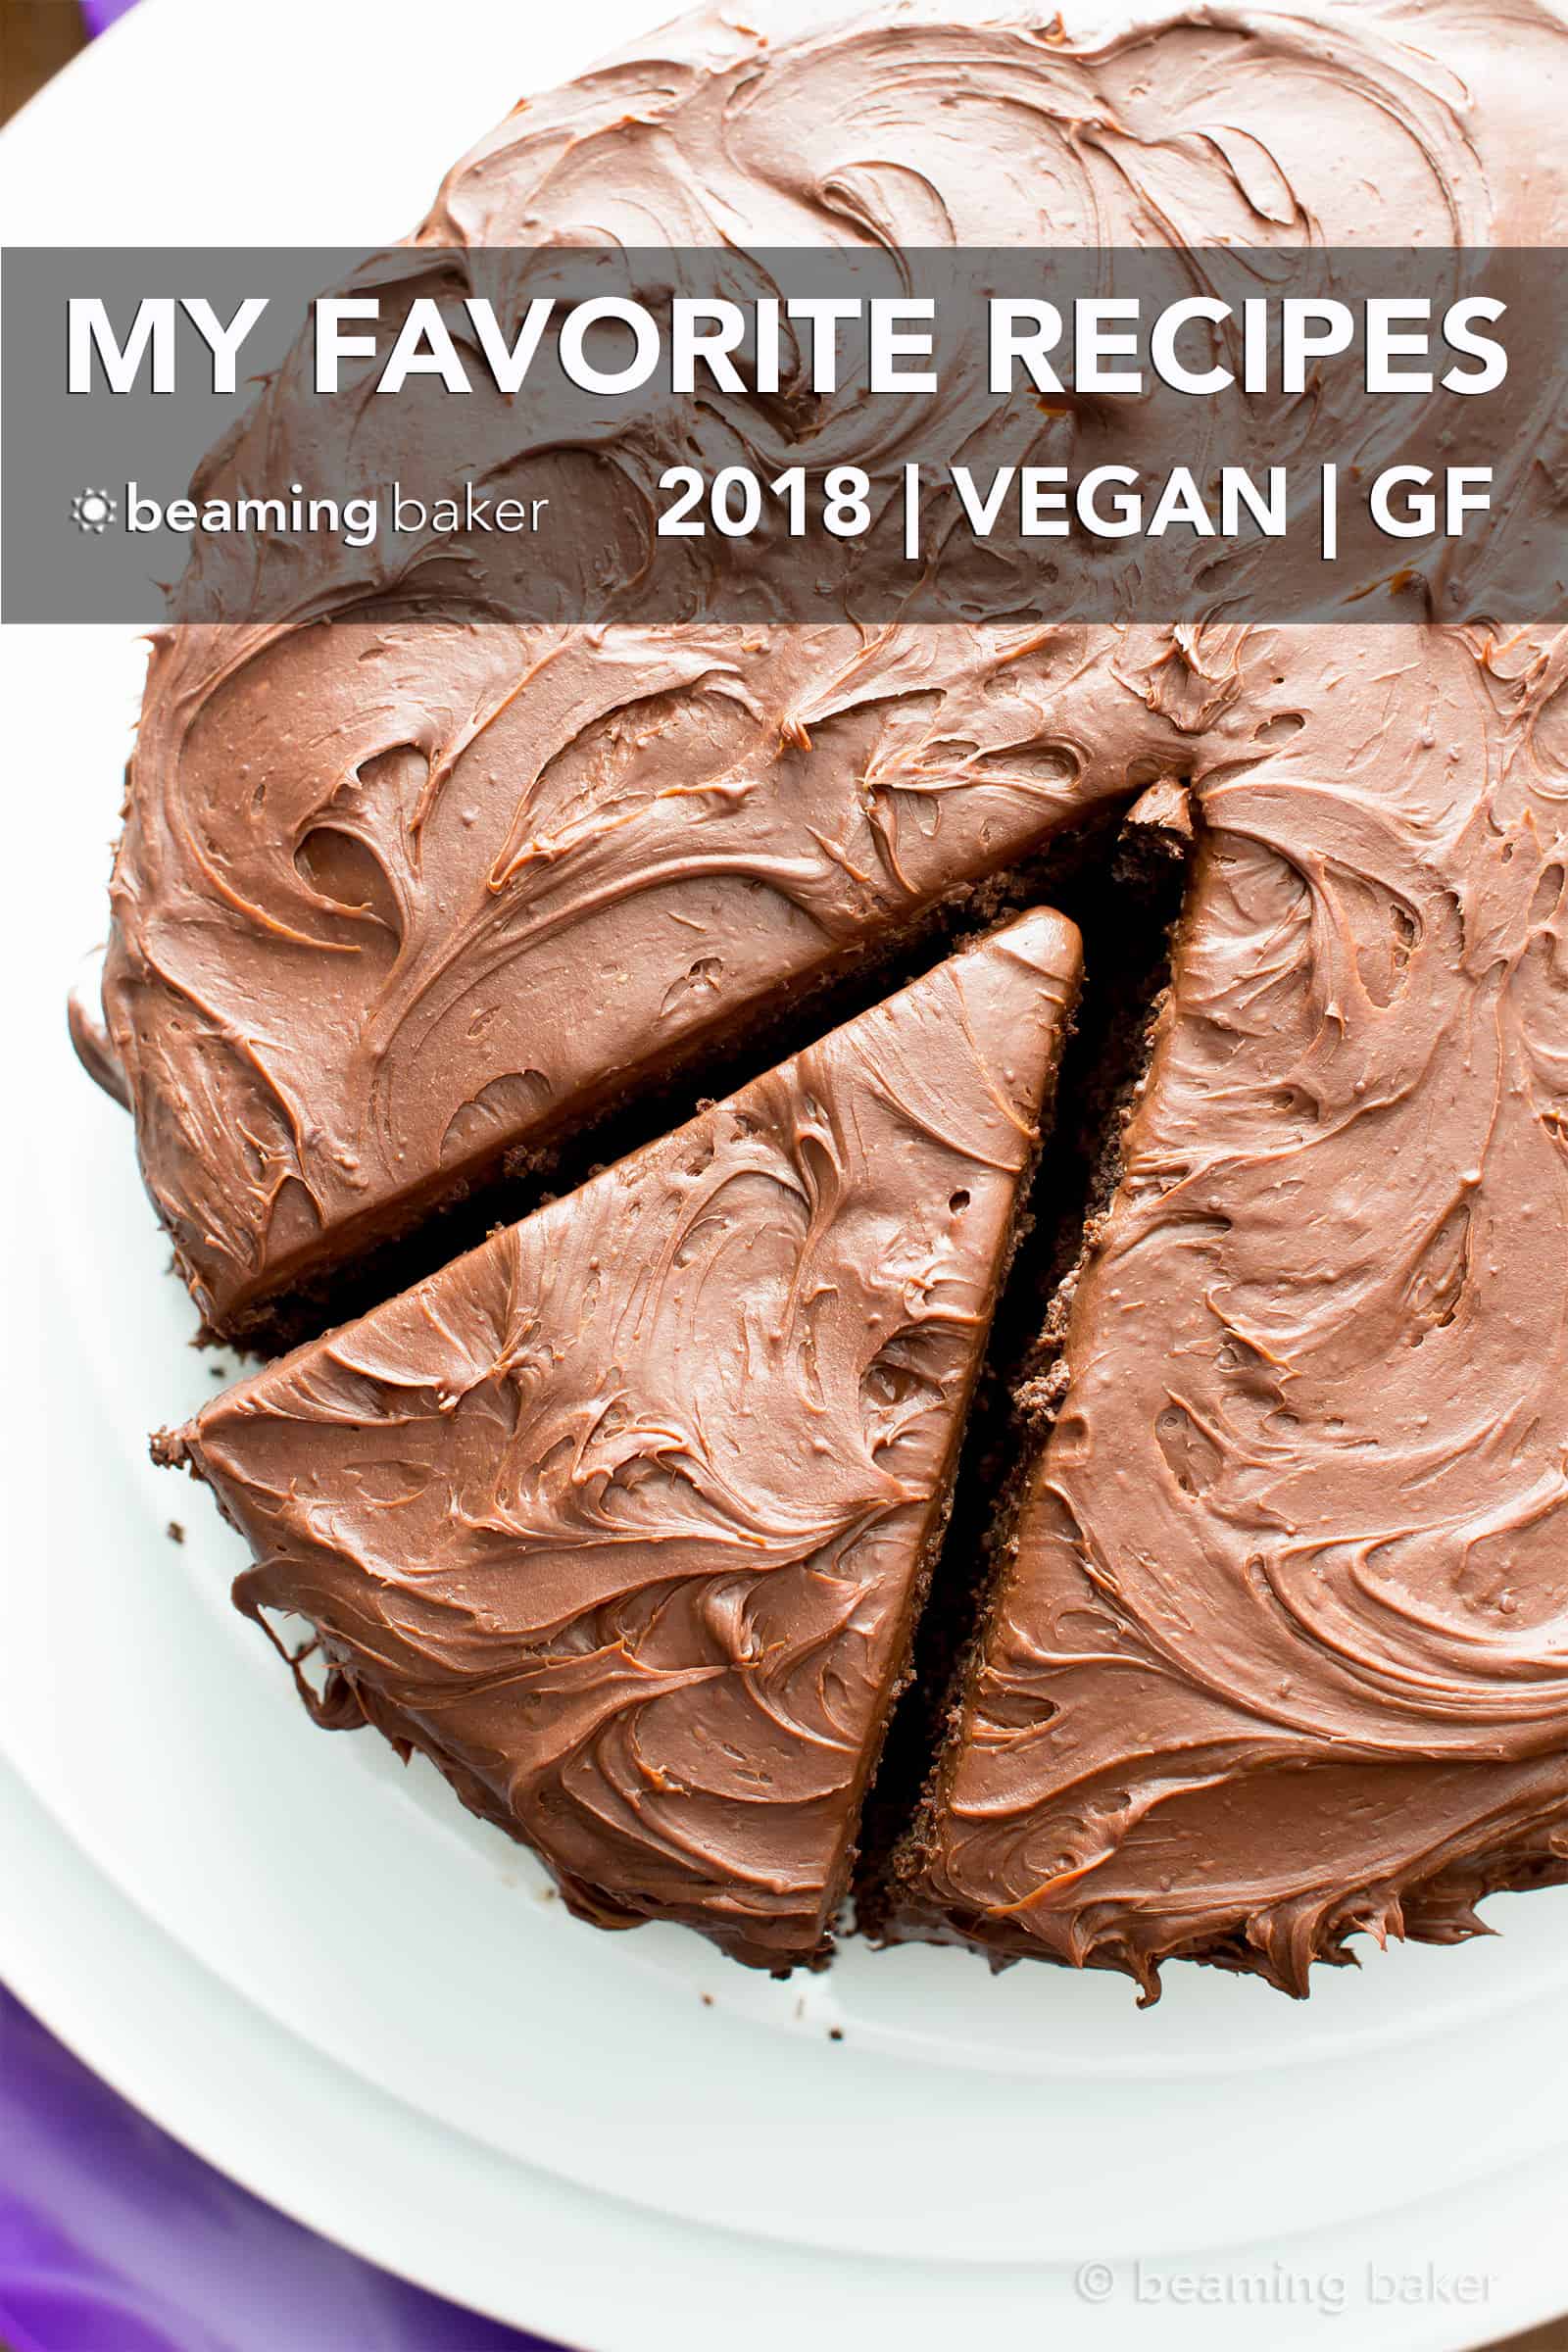 Happy NYE + My Favorite Gluten Free Vegan Recipes of 2018: the best & yummiest healthy dessert recipes of the year, quick bread, cookies, granola, muffins and more! #HealthySnacks #VeganBaking #VeganGlutenFree #PaleoDesserts #BeamingBaker | Recipes on BeamingBaker.com